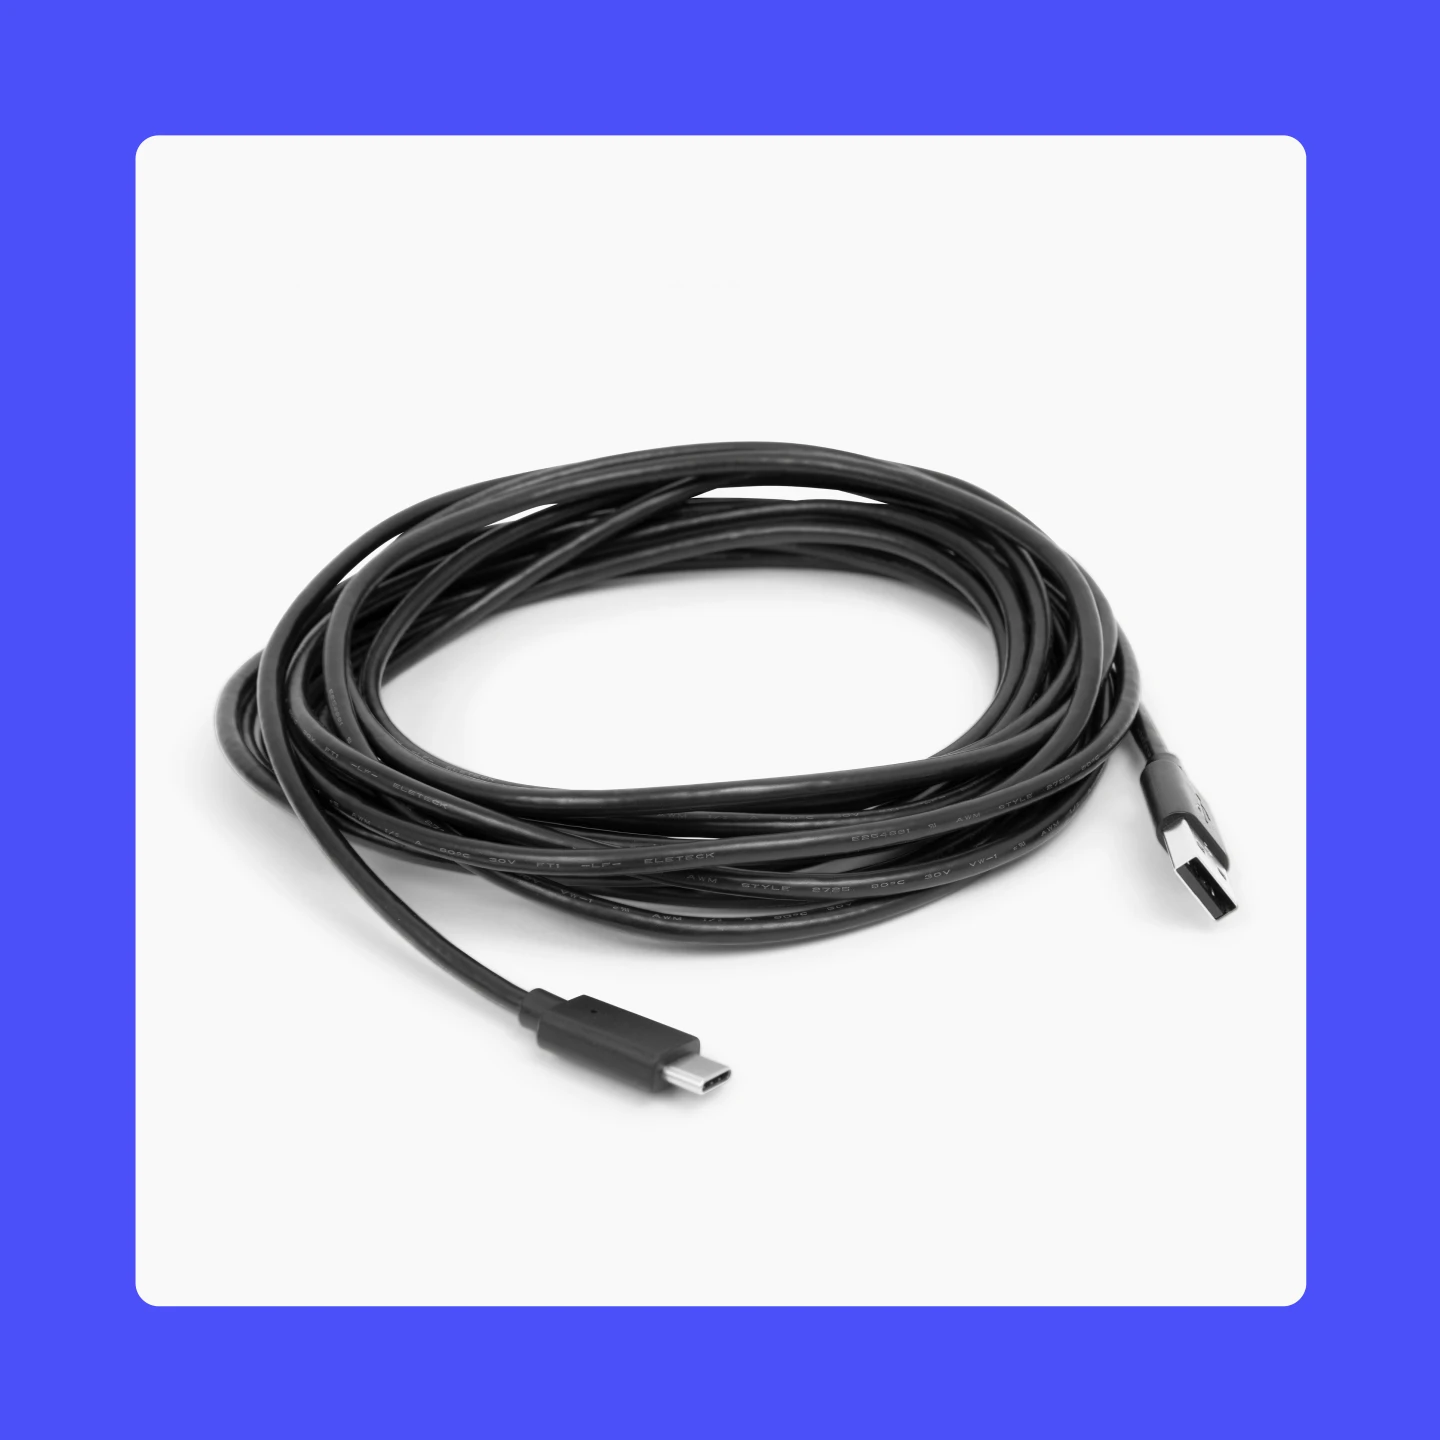 USB Extension Cable (16 Feet/5M)